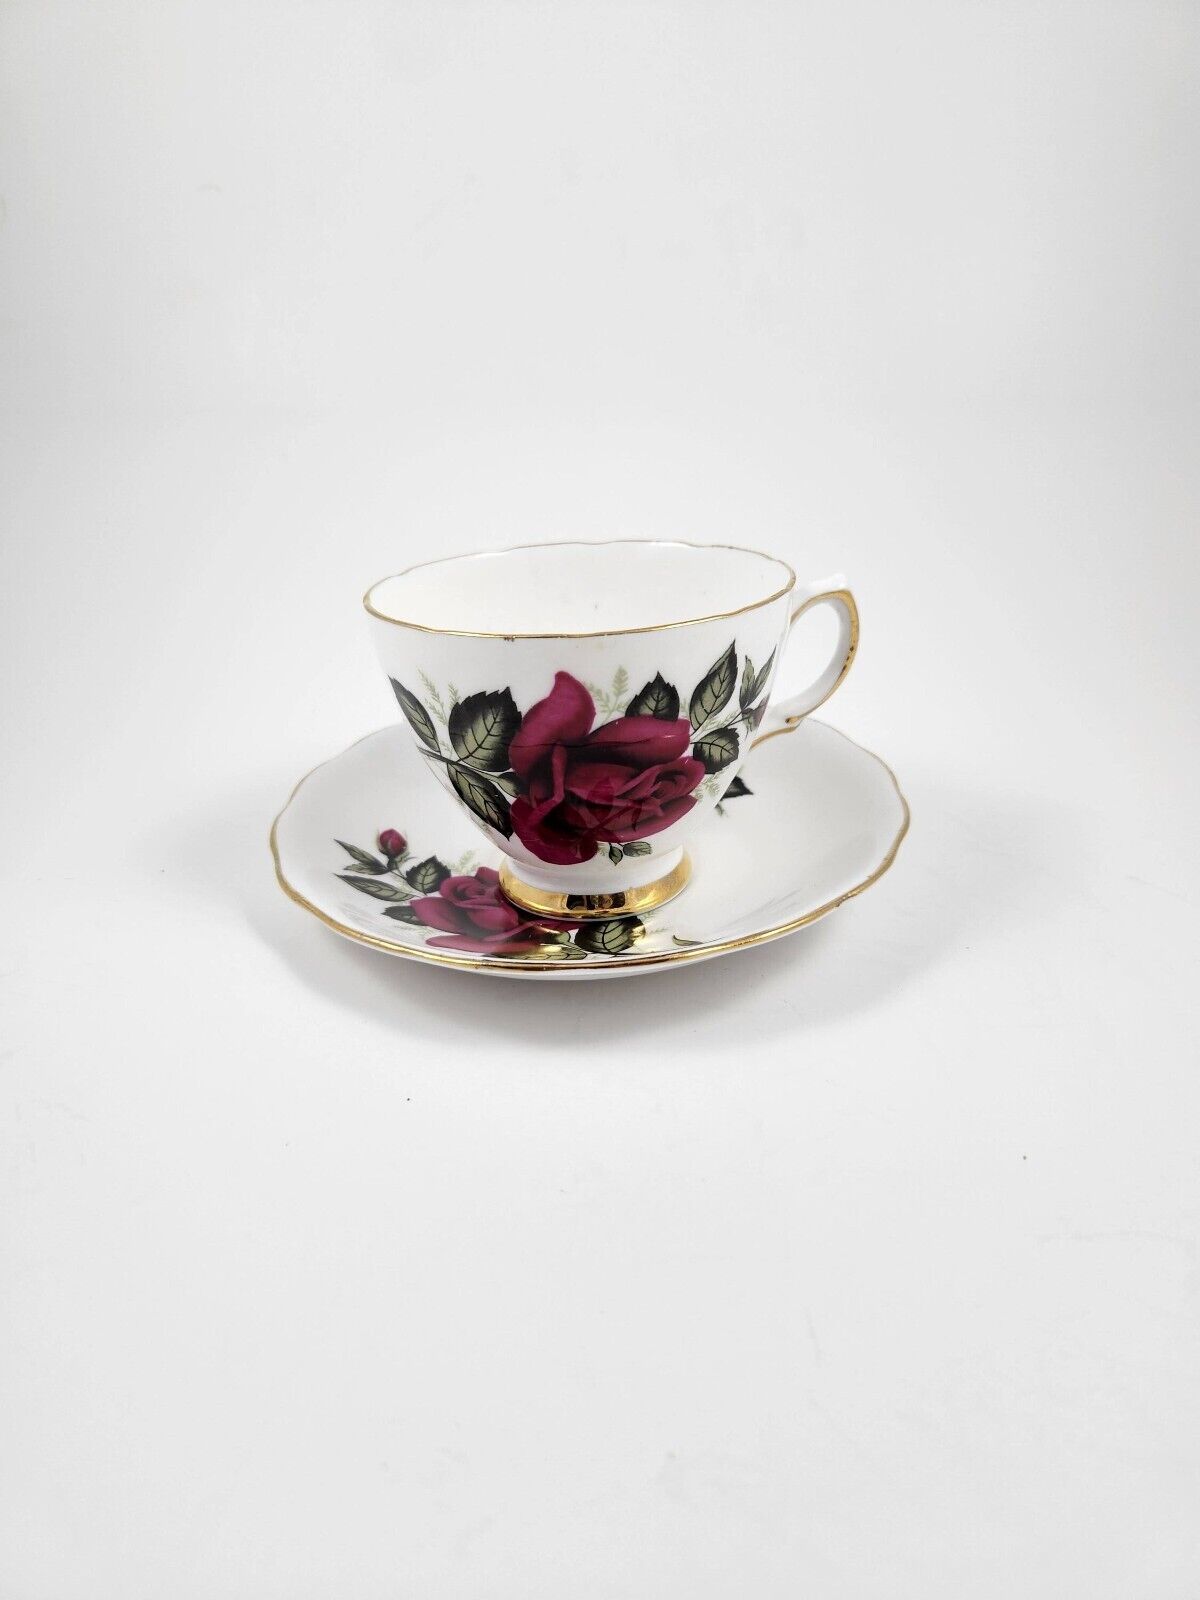 Vintage Colclough - Footed Teacup / Saucer - Featuring Red Roses And Gold Trim